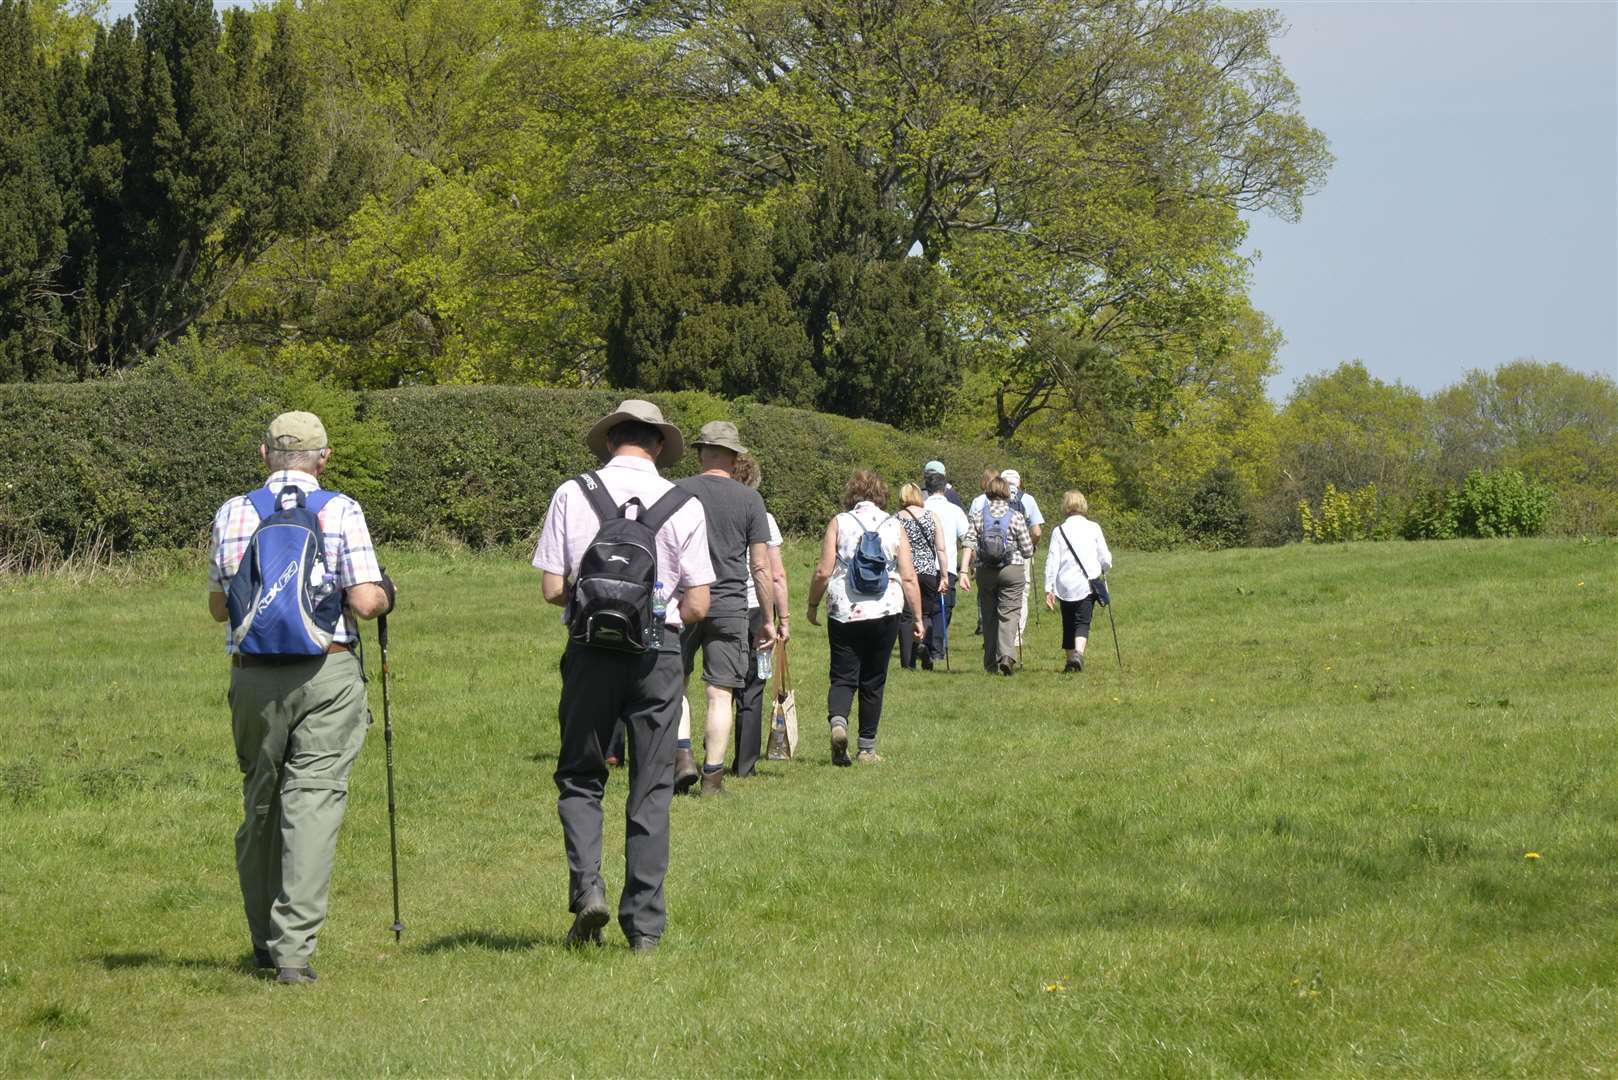 Swanley & North Downs Lions Club has raised much money over the years at events such as this Bluebell Walk in 2016 in aid of ellenor hospice